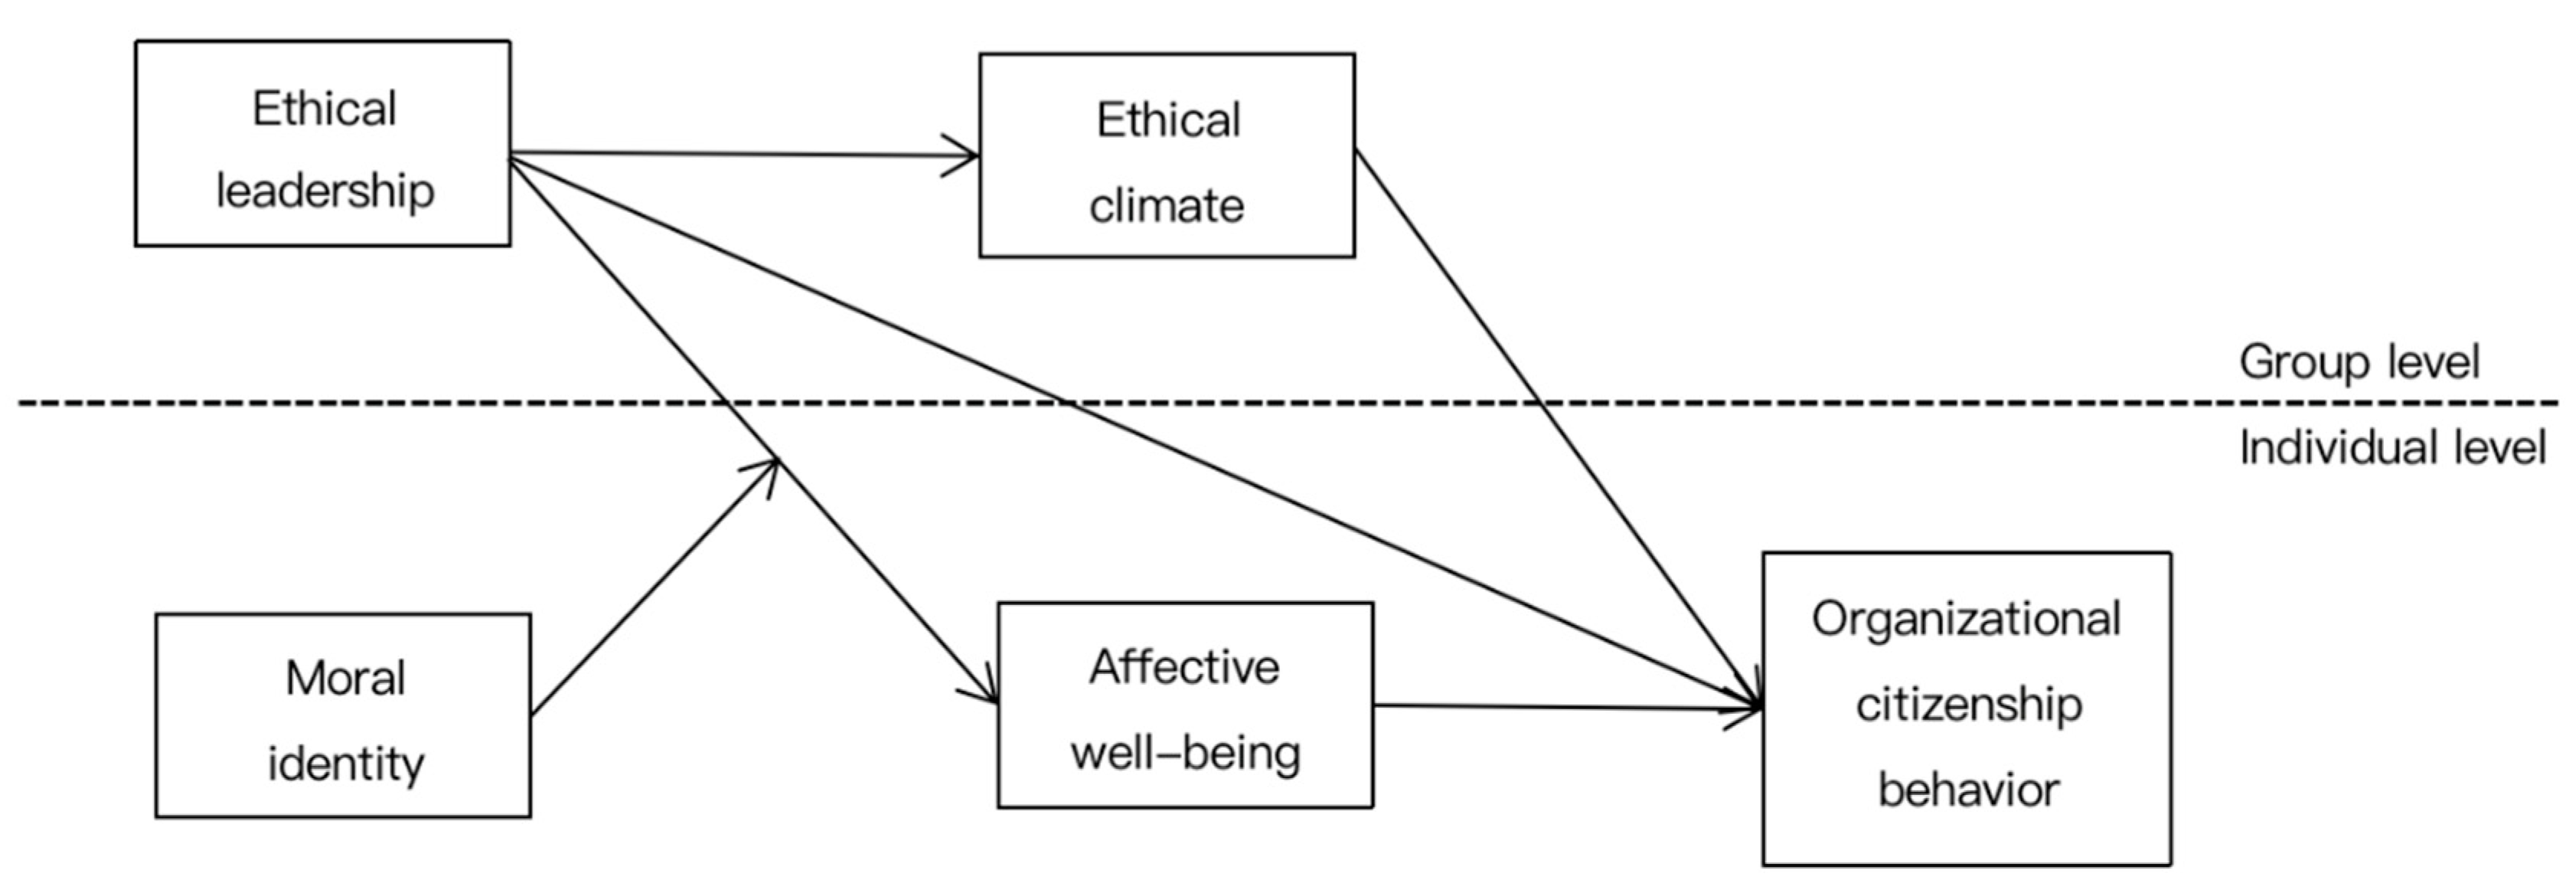 IJERPH | Free Full-Text | Improving Millennial Employees' OCB: A Multilevel  Mediated and Moderated Model of Ethical Leadership | HTML